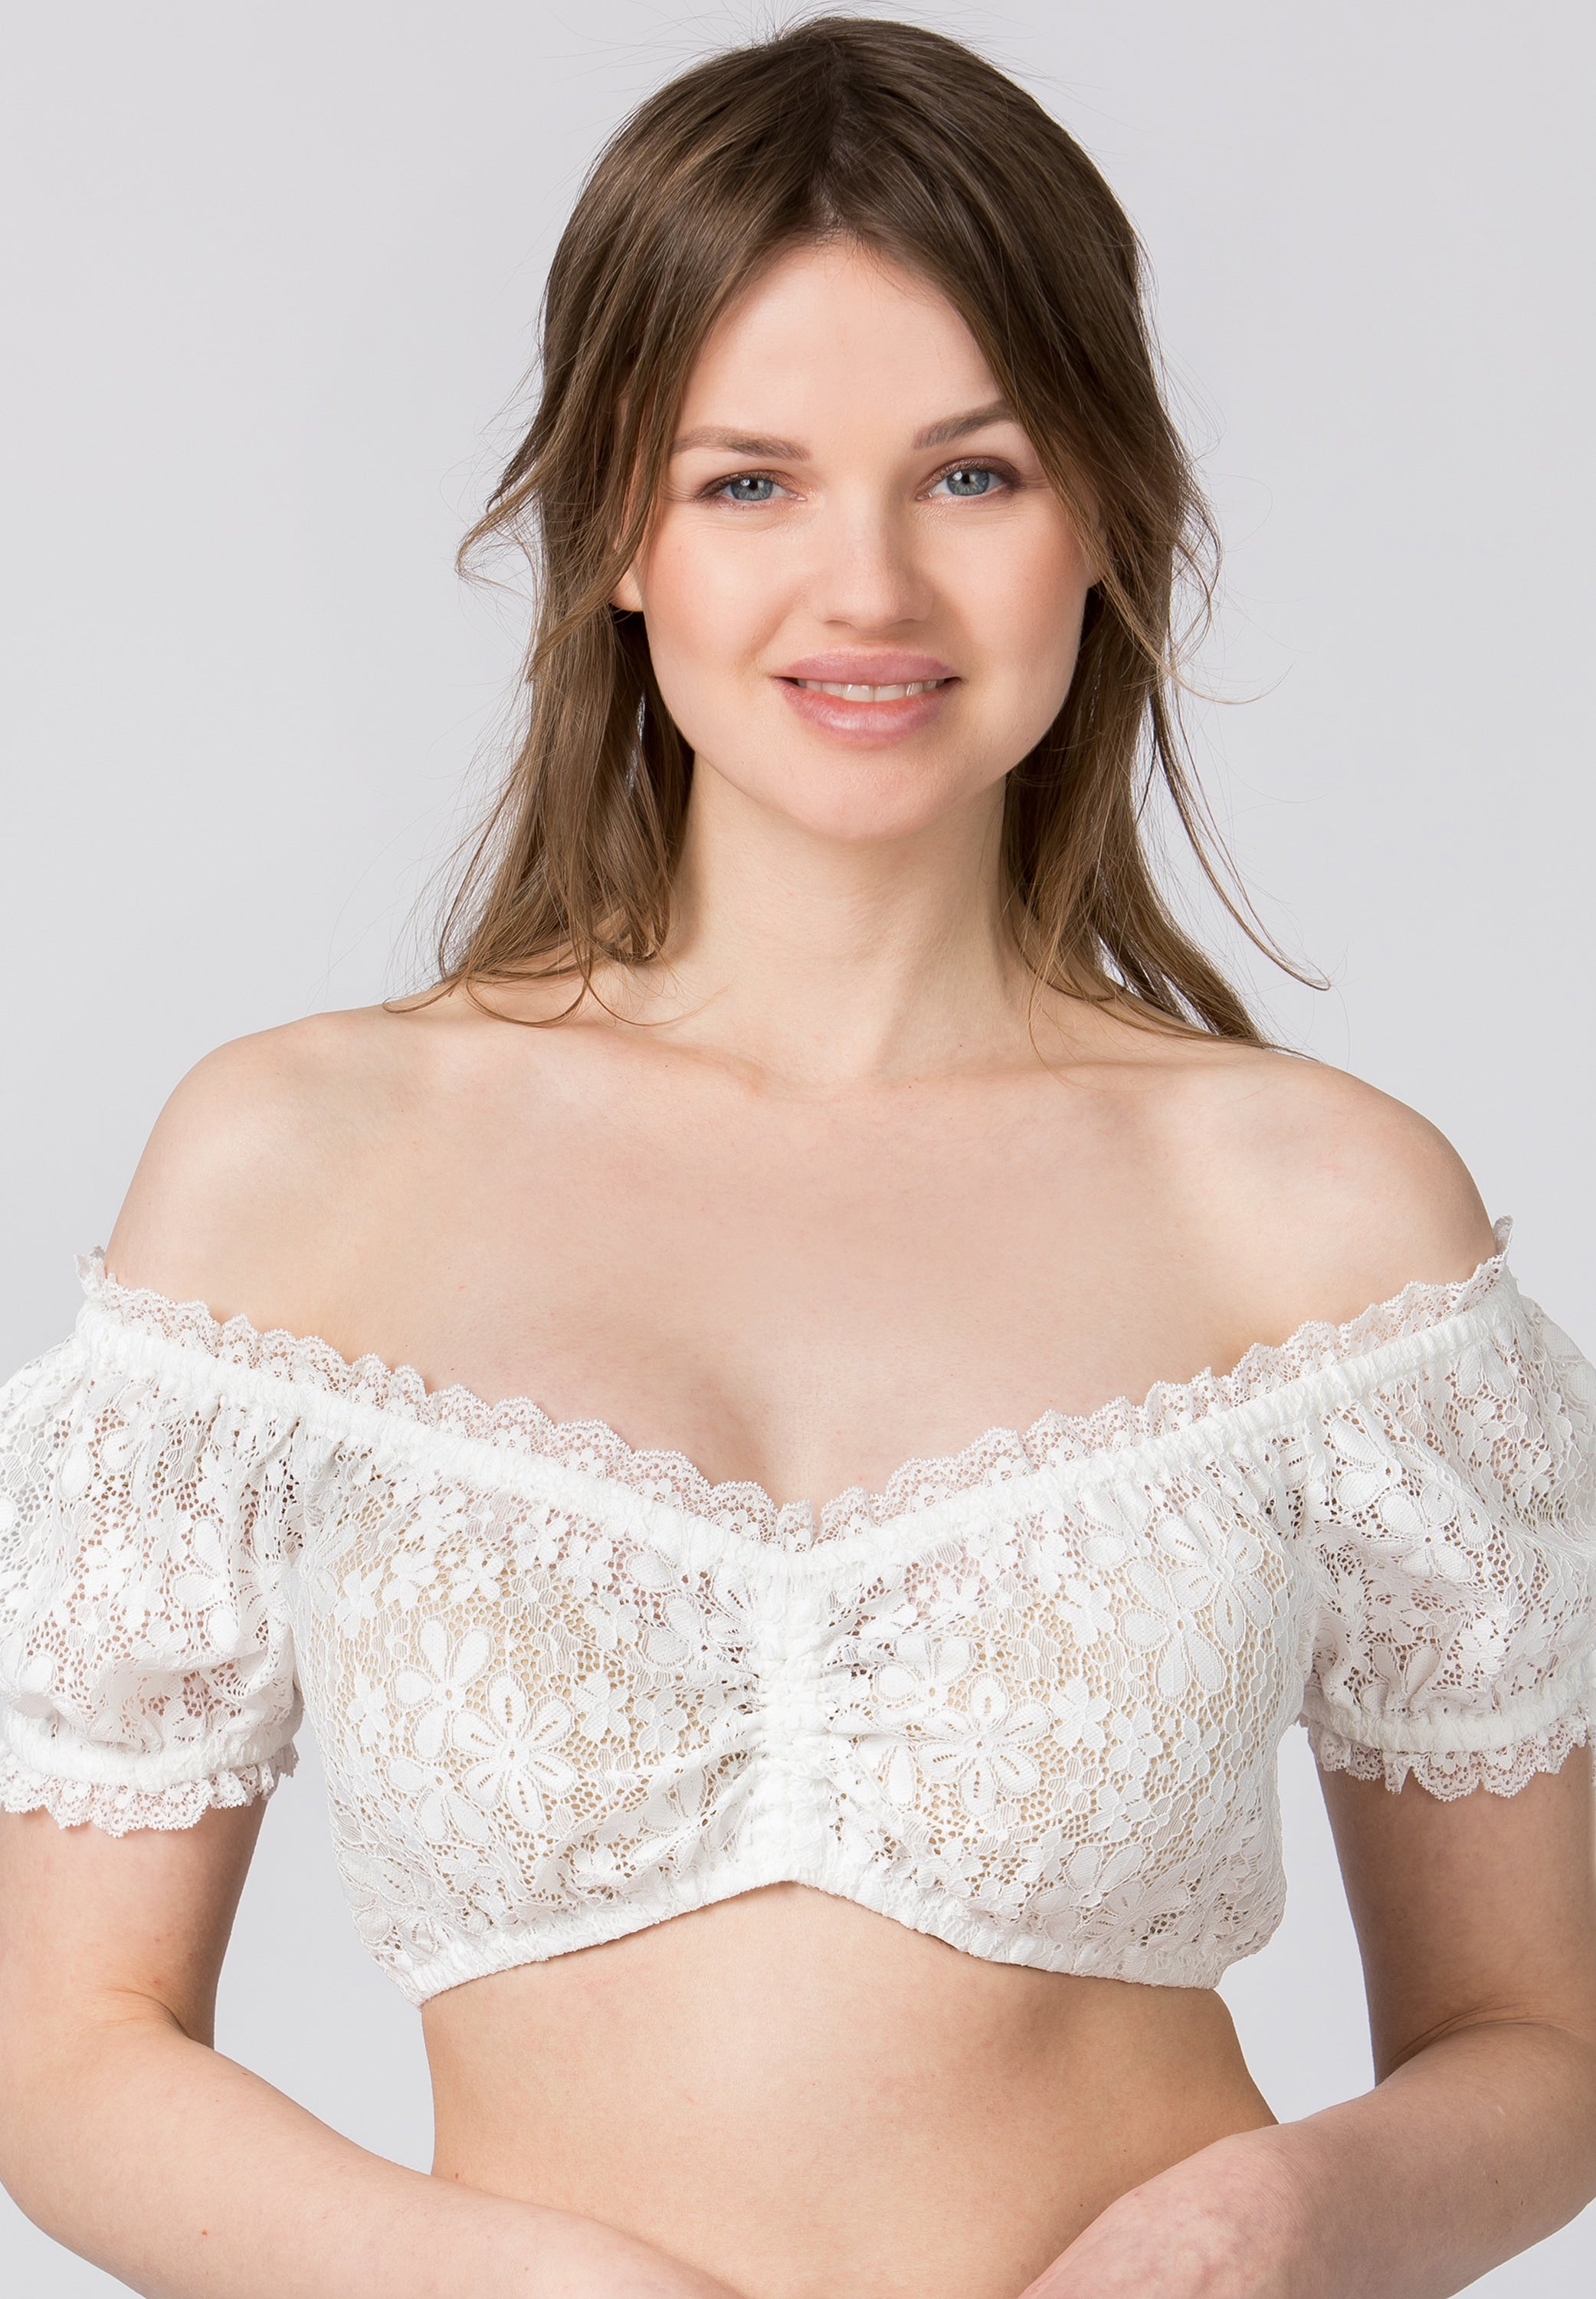 CocoVero Dirndl blouse EMILY made of lace in white